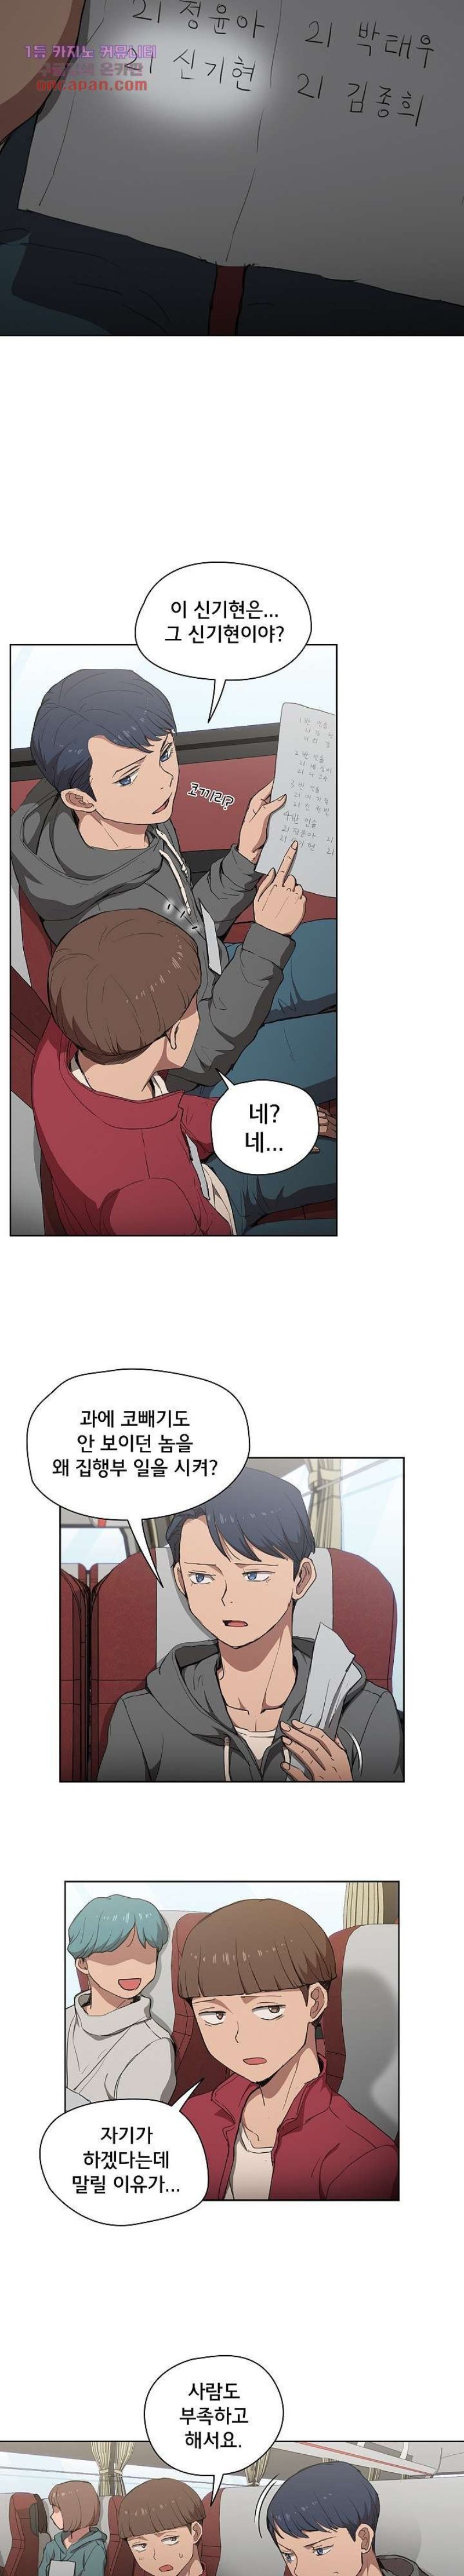 how-about-getting-lost-raw-chap-32-6